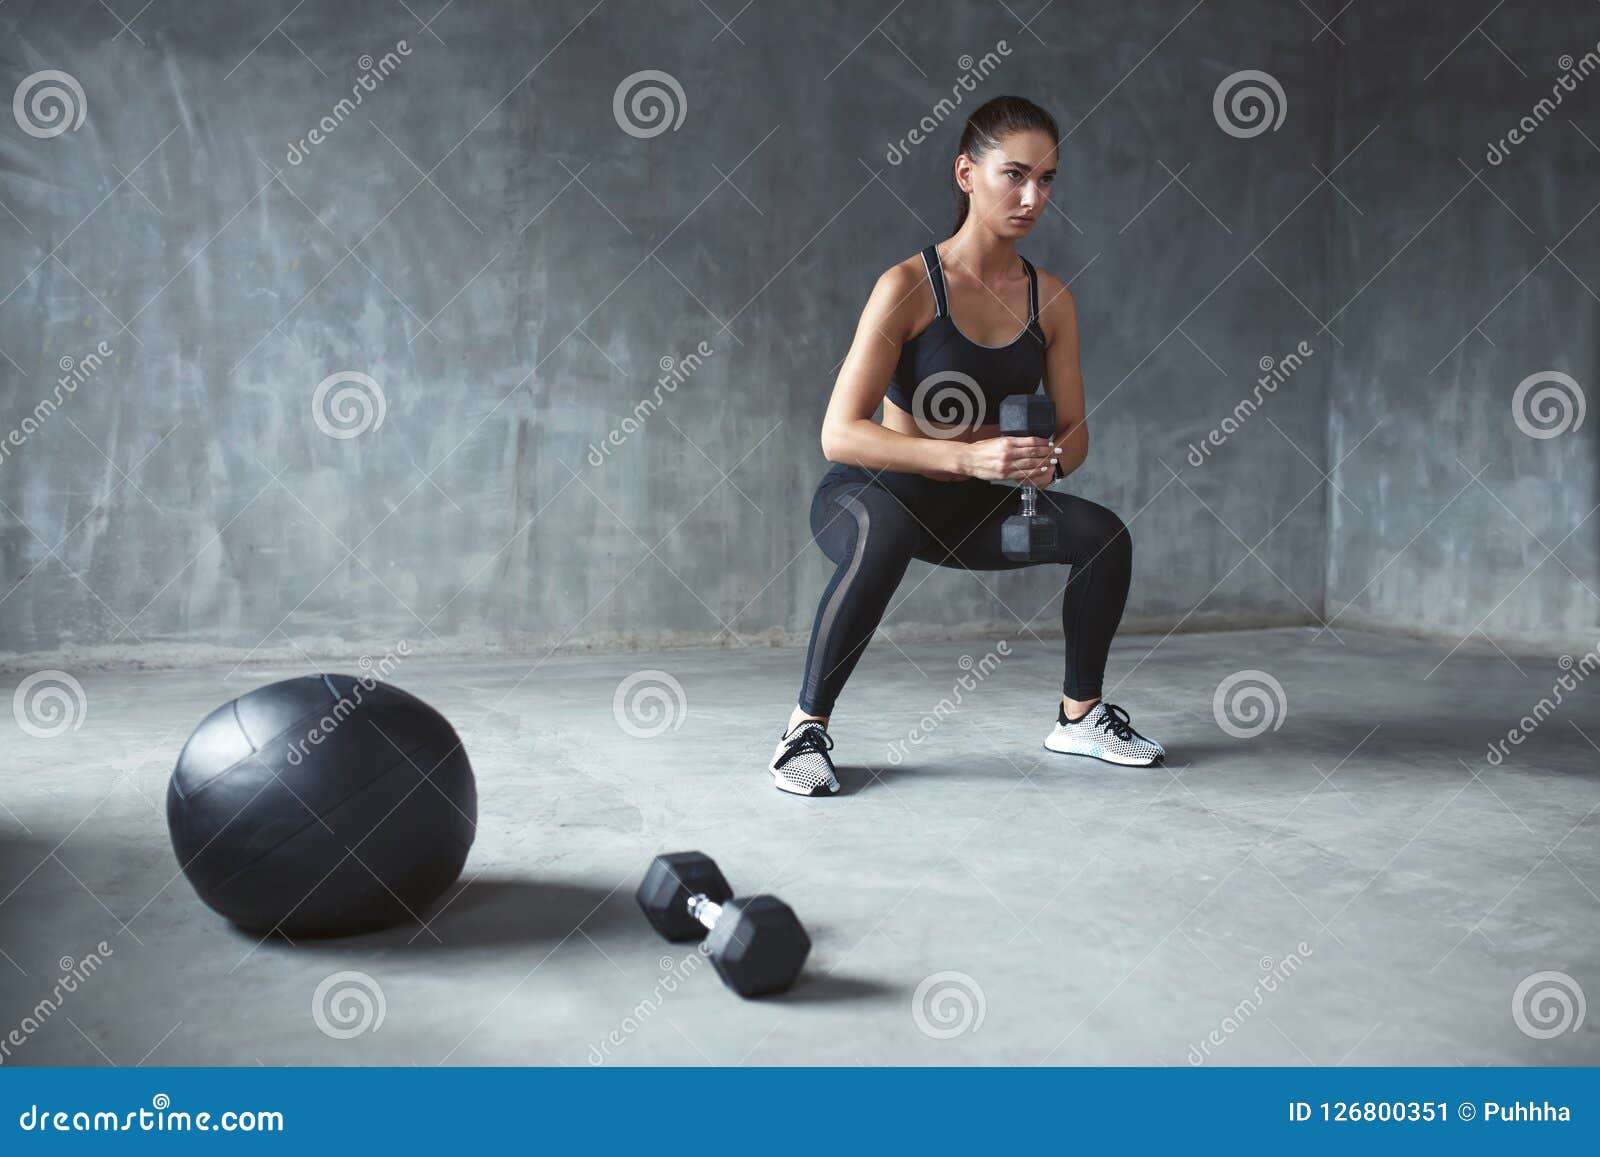 Woman in Stylish Sports Wear Training with Med Ball Stock Photo - Image of  fashionable, pants: 126799294